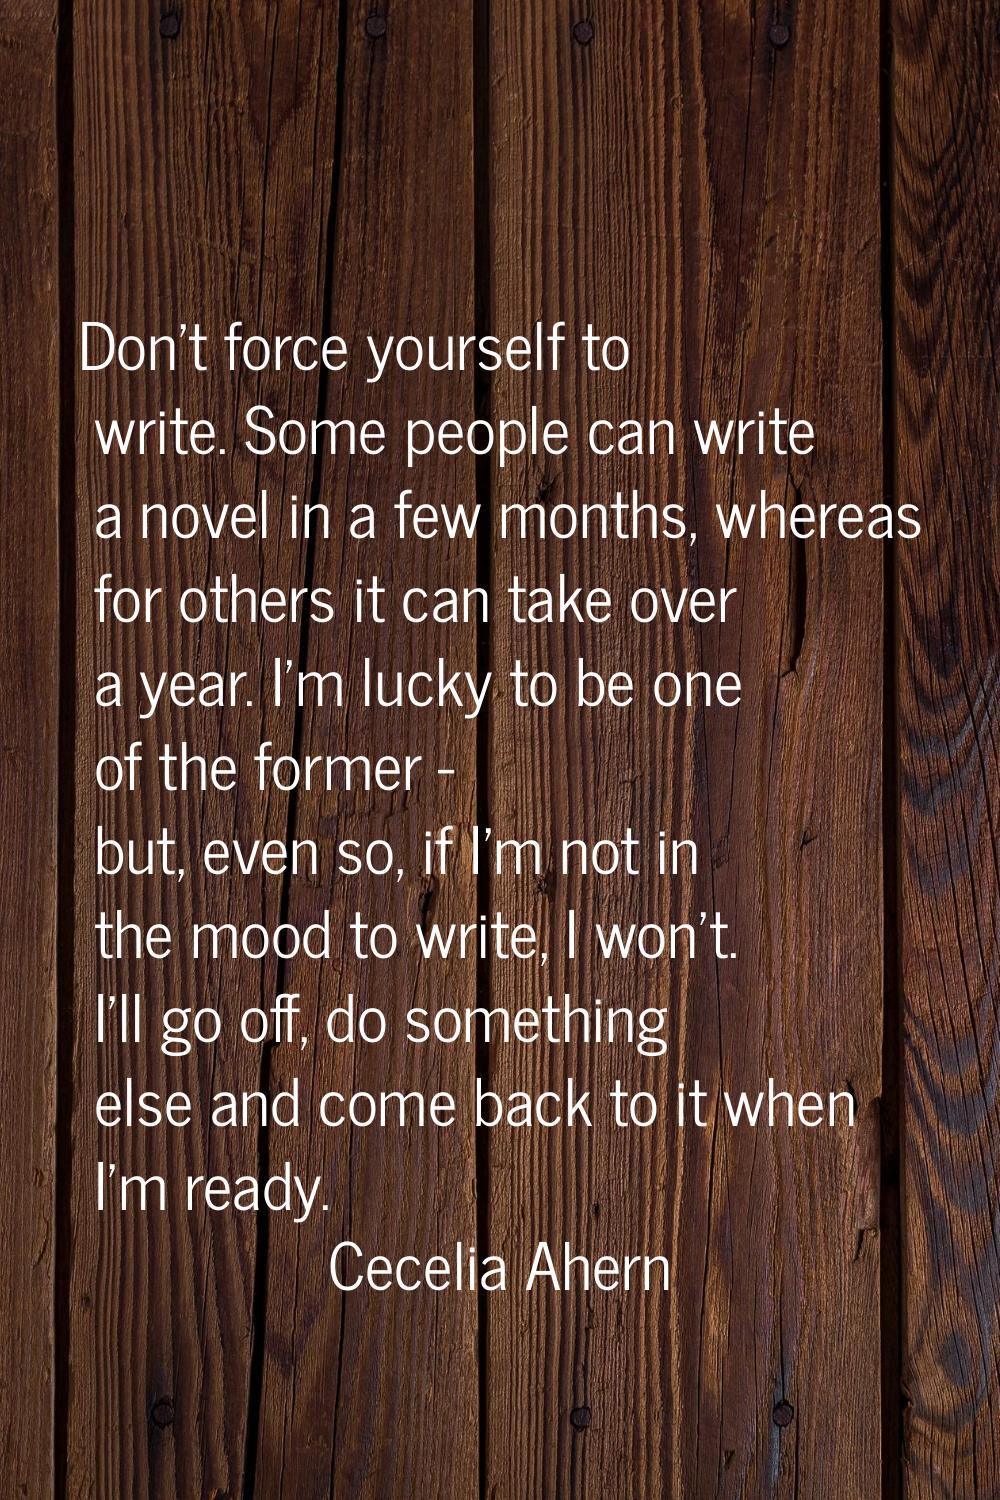 Don't force yourself to write. Some people can write a novel in a few months, whereas for others it